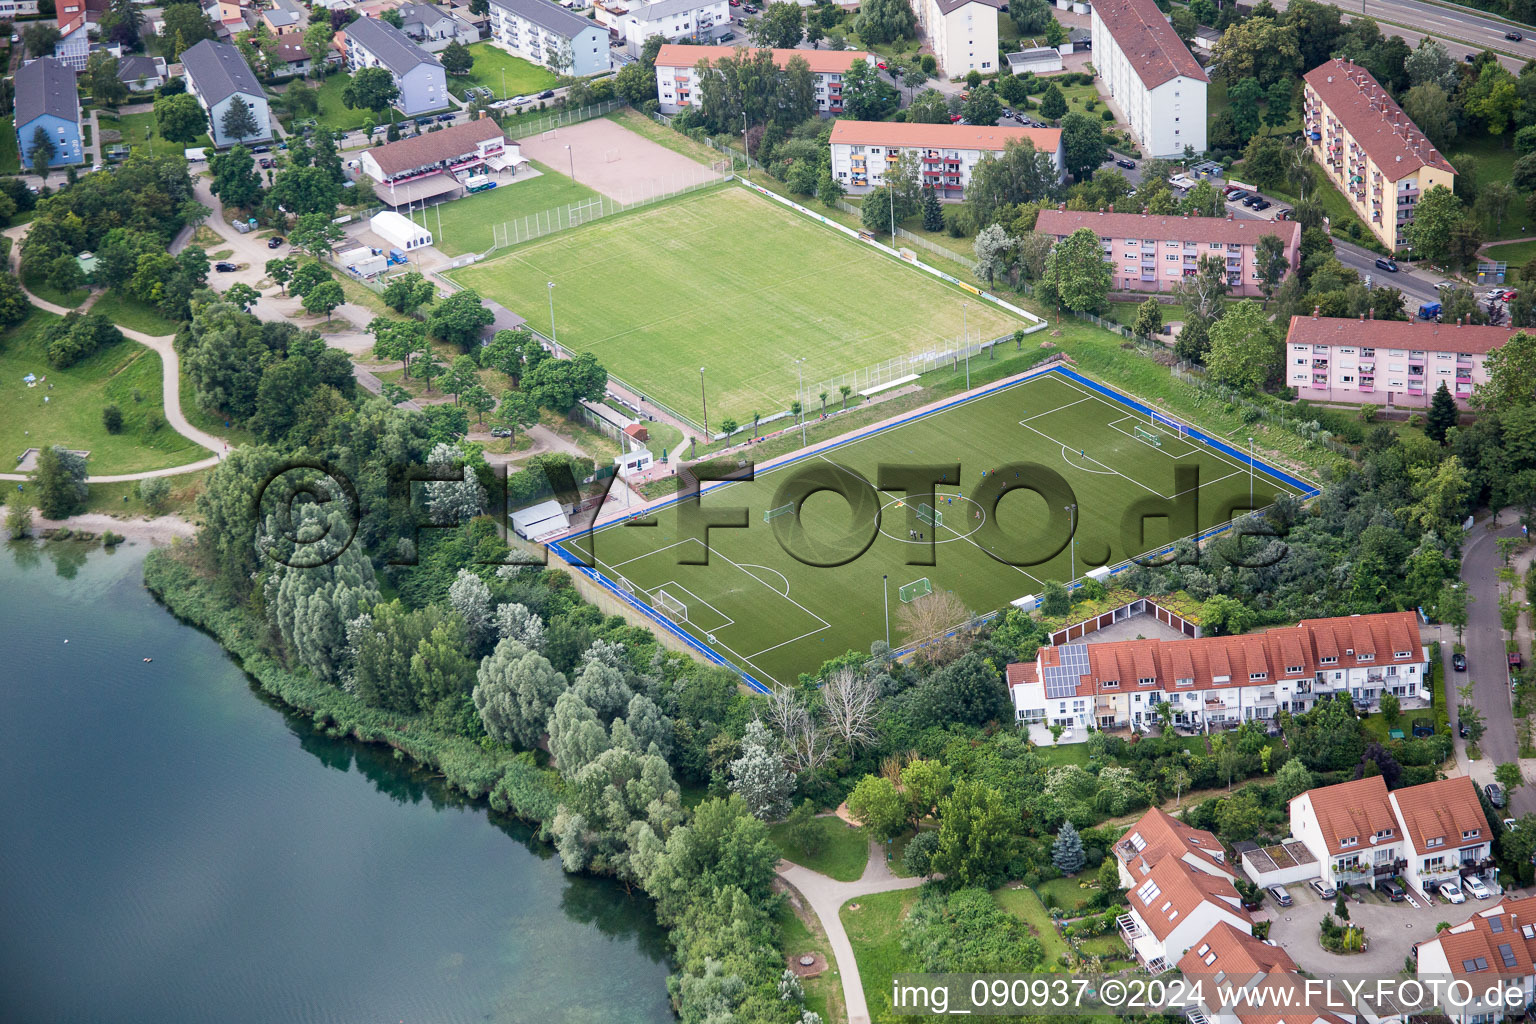 Sports grounds and football pitch von SV Rot-Weiss on Rheinauer See in the district Rheinau in Mannheim in the state Baden-Wurttemberg, Germany